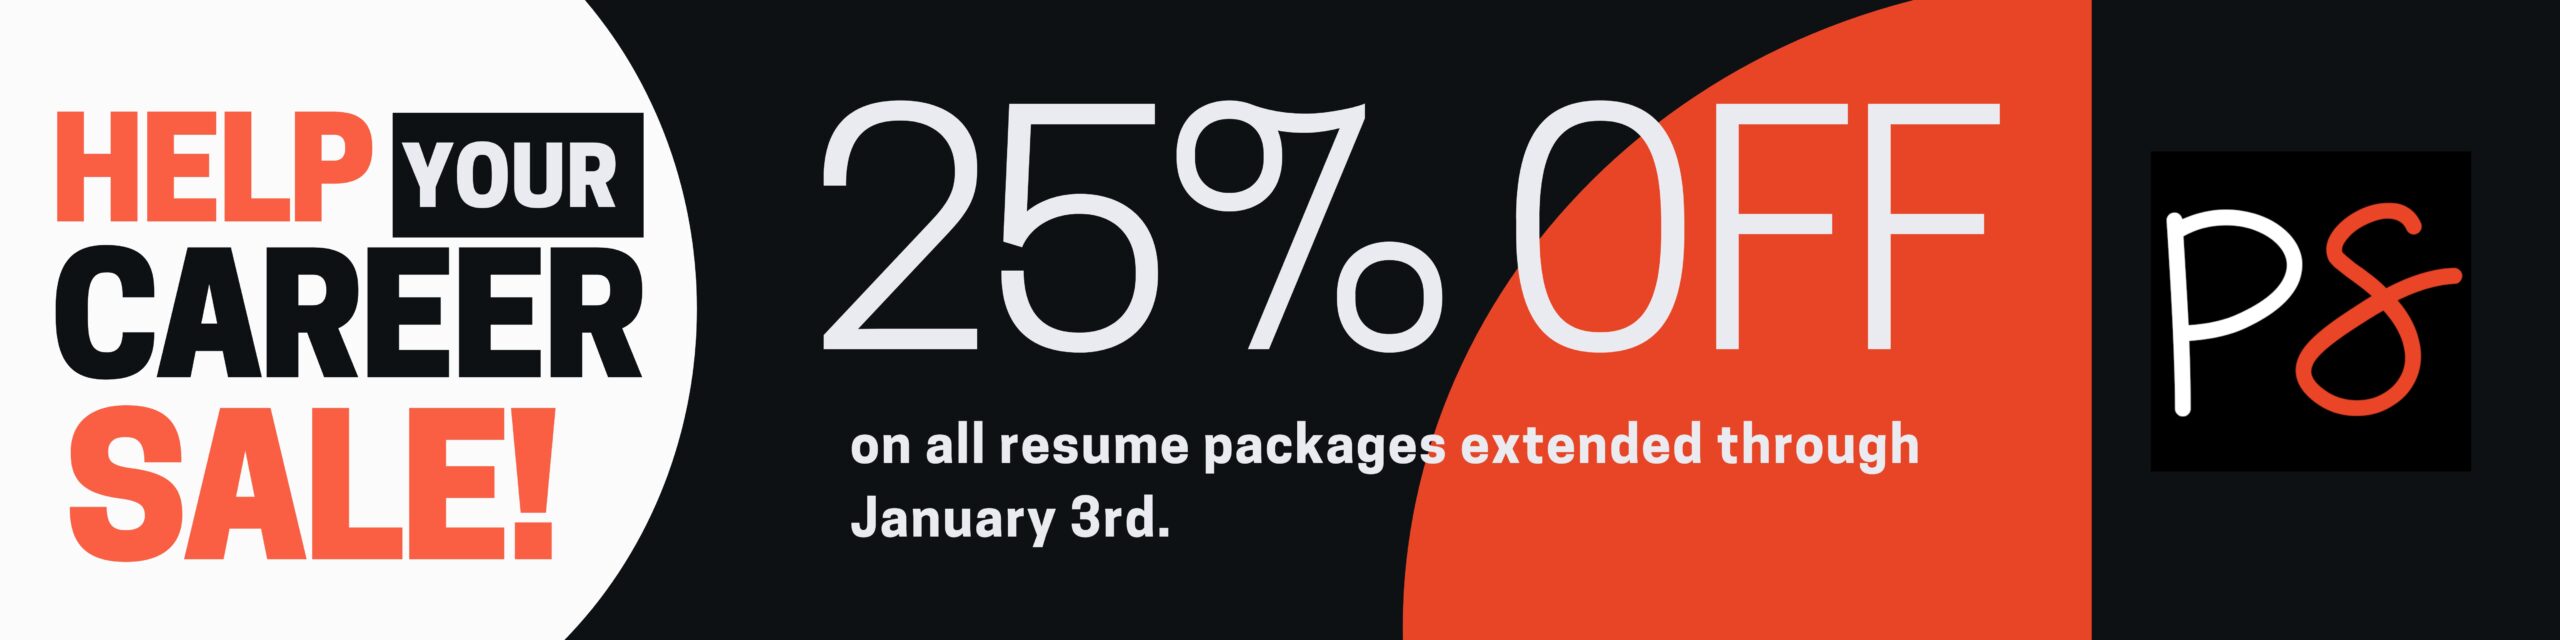 20% of all resume packages